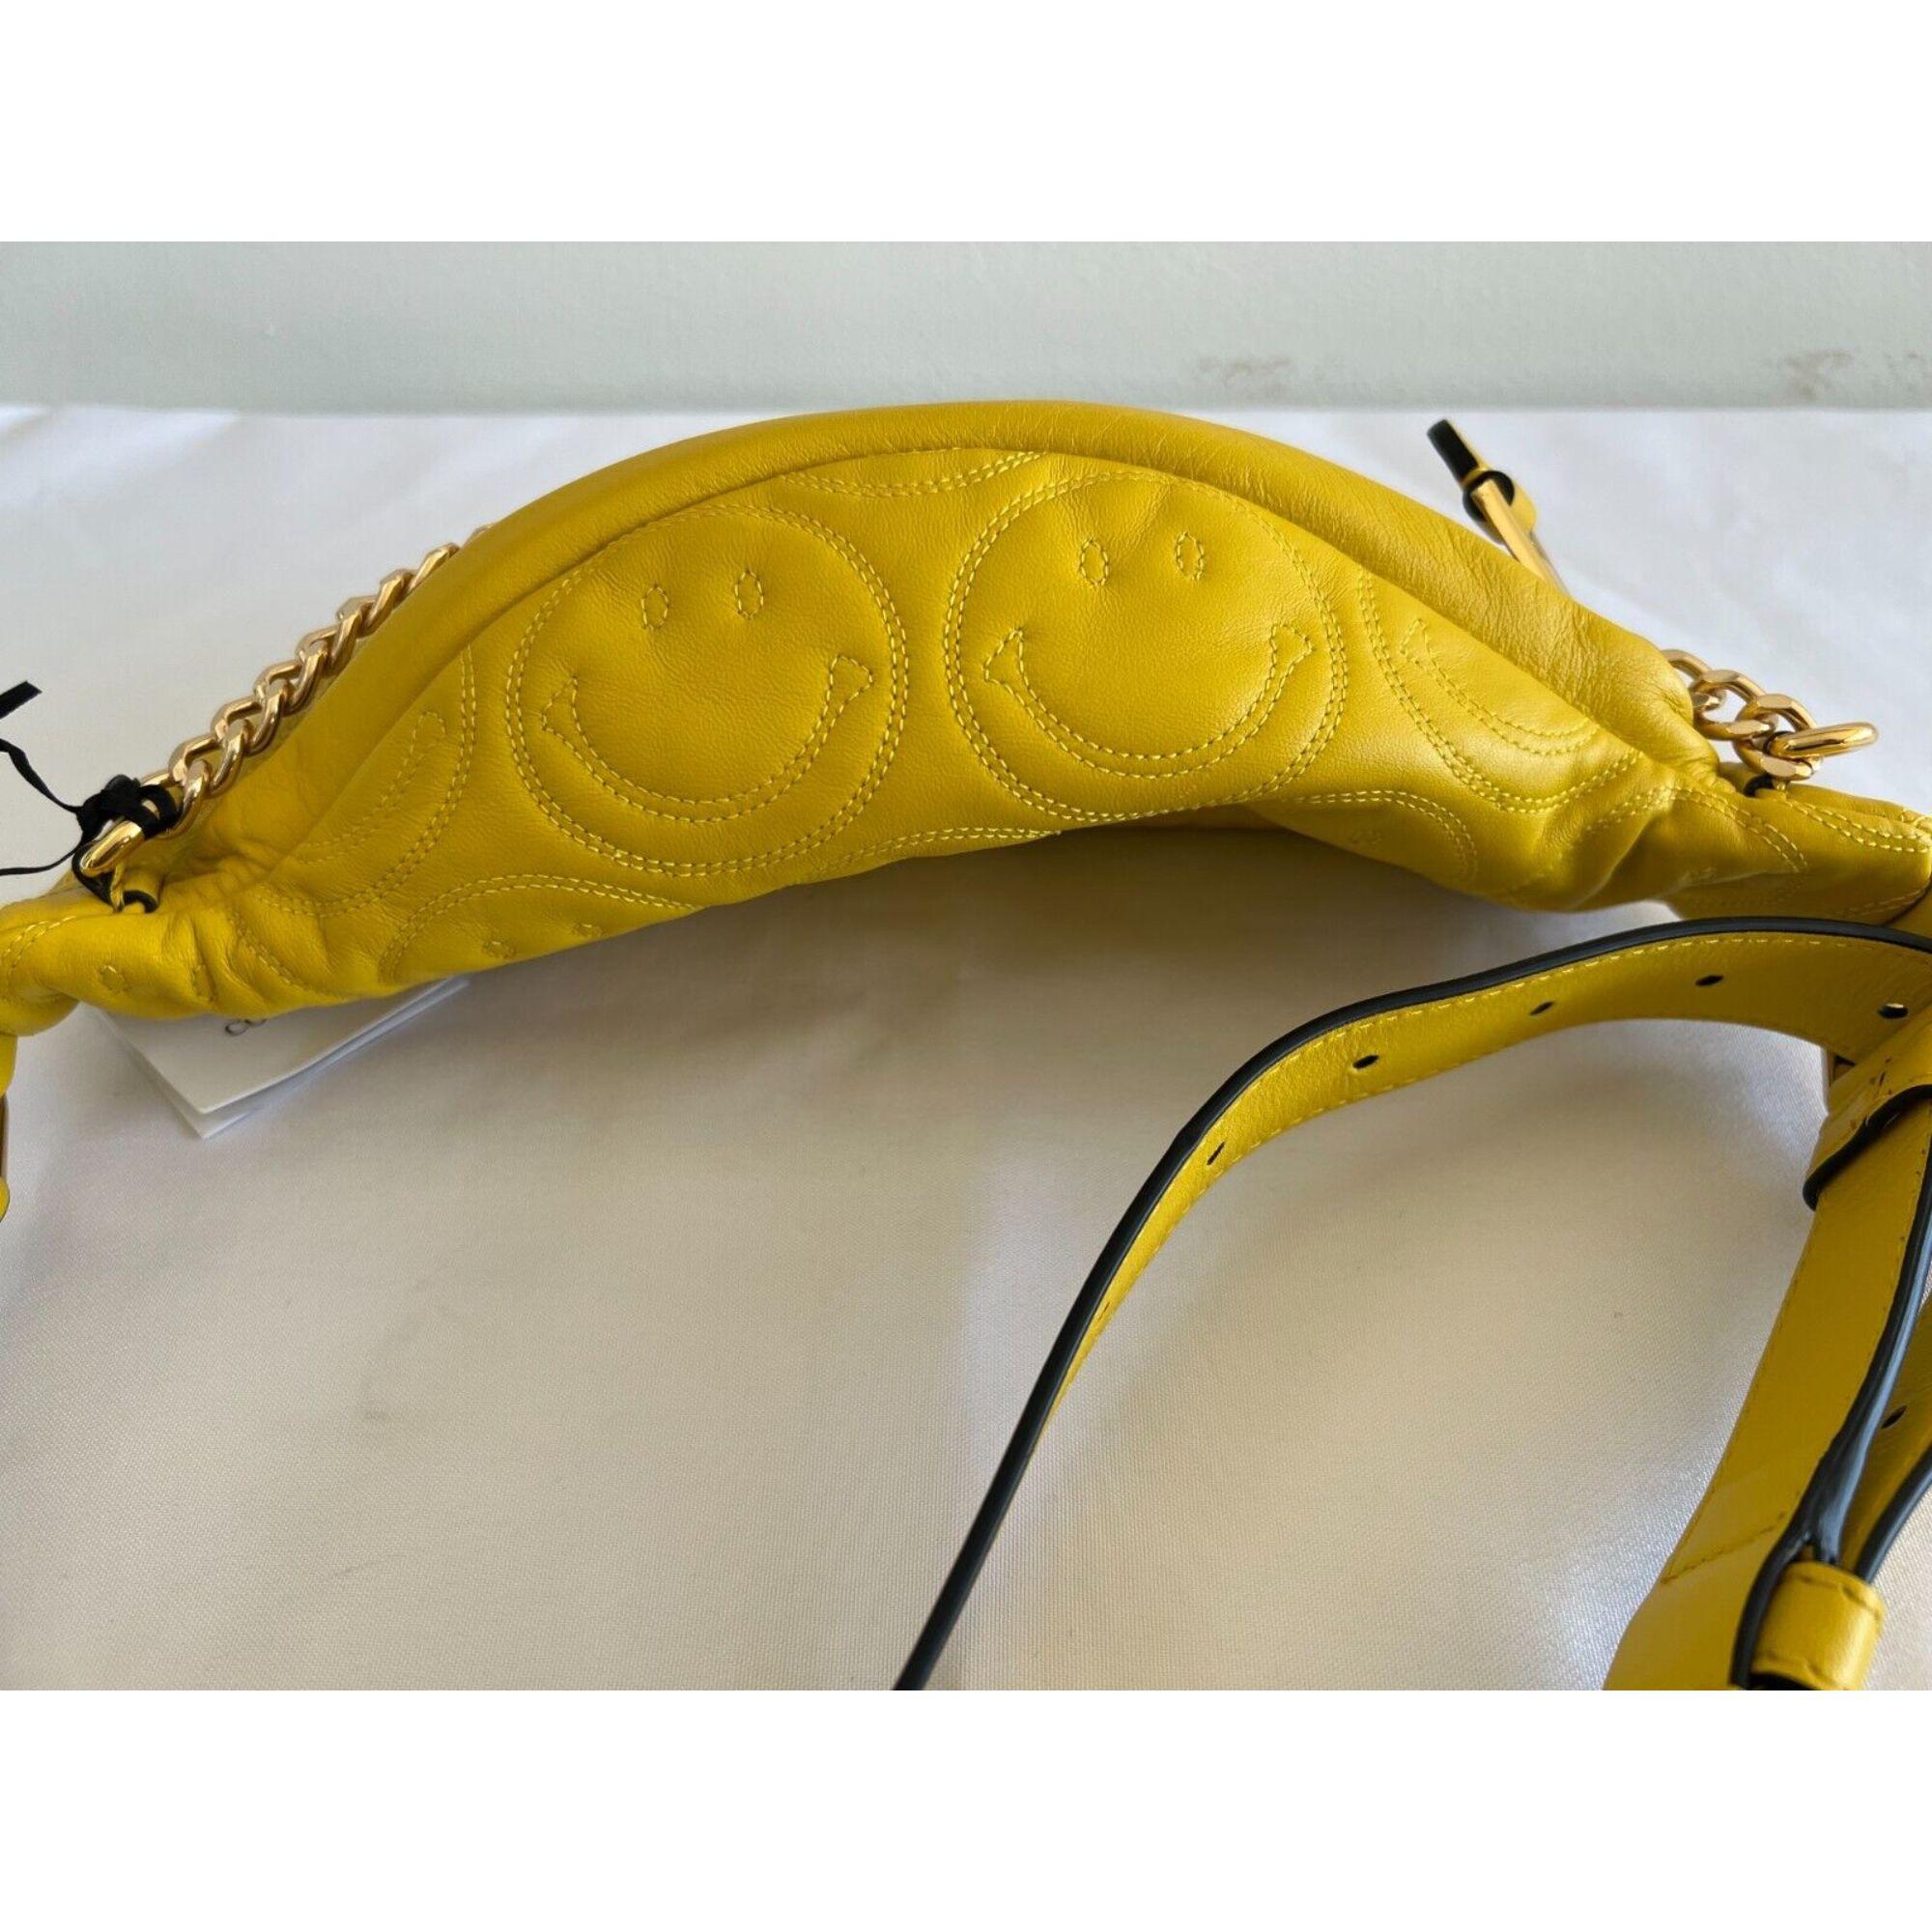 SS21 Moschino Couture Yellow Fanny Pack with Engraved Smiley by Jeremy Scott For Sale 4